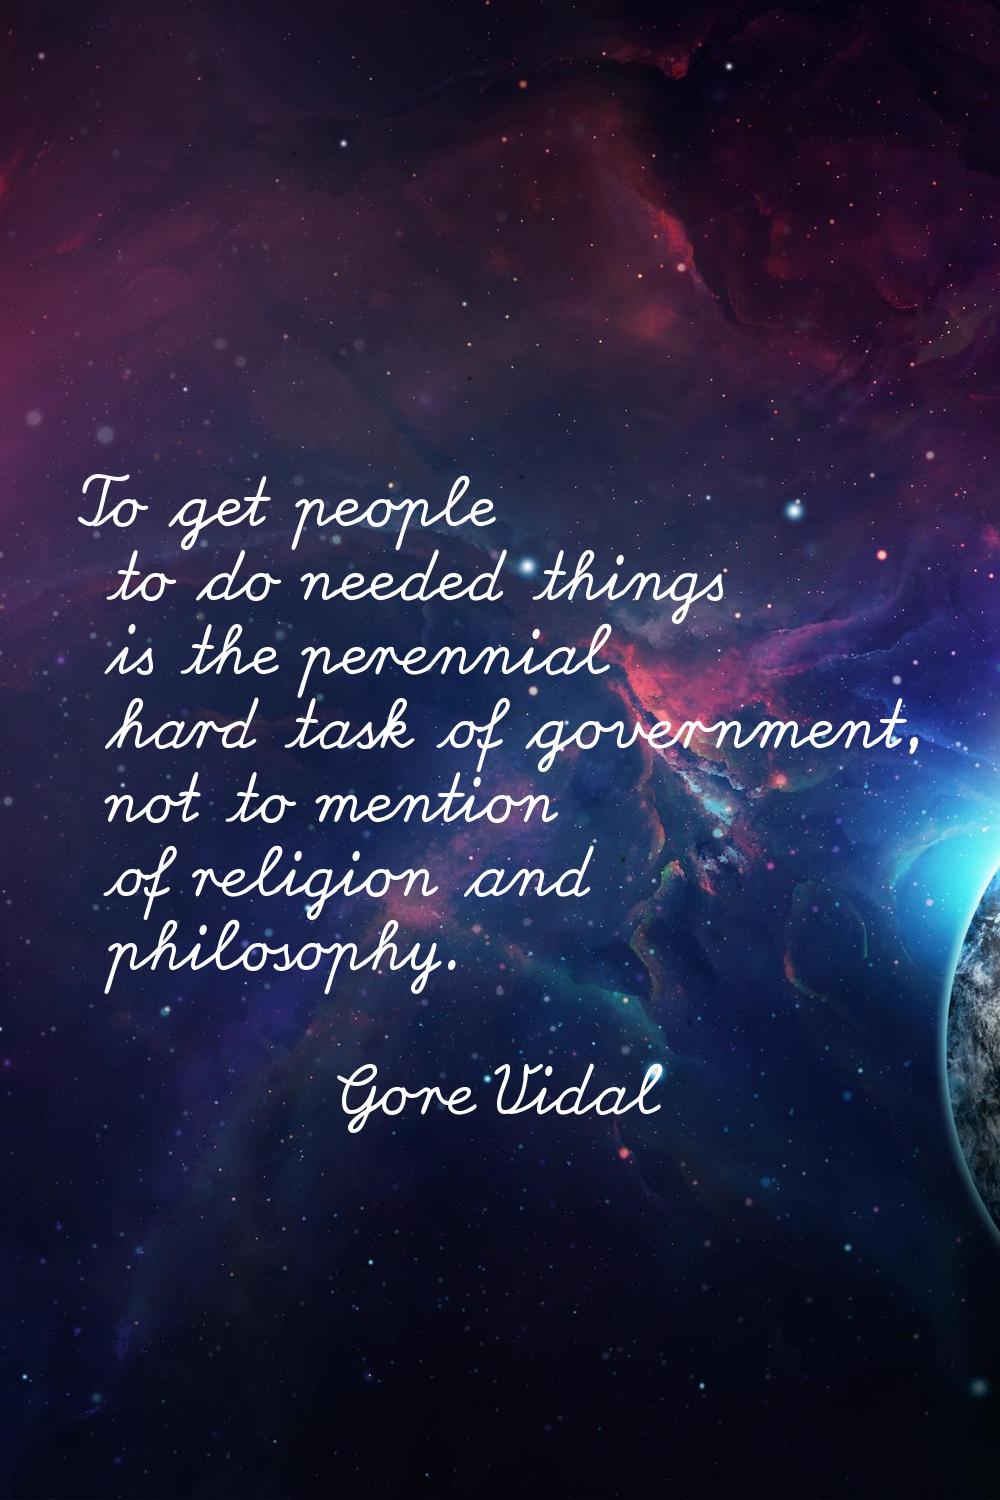 To get people to do needed things is the perennial hard task of government, not to mention of relig